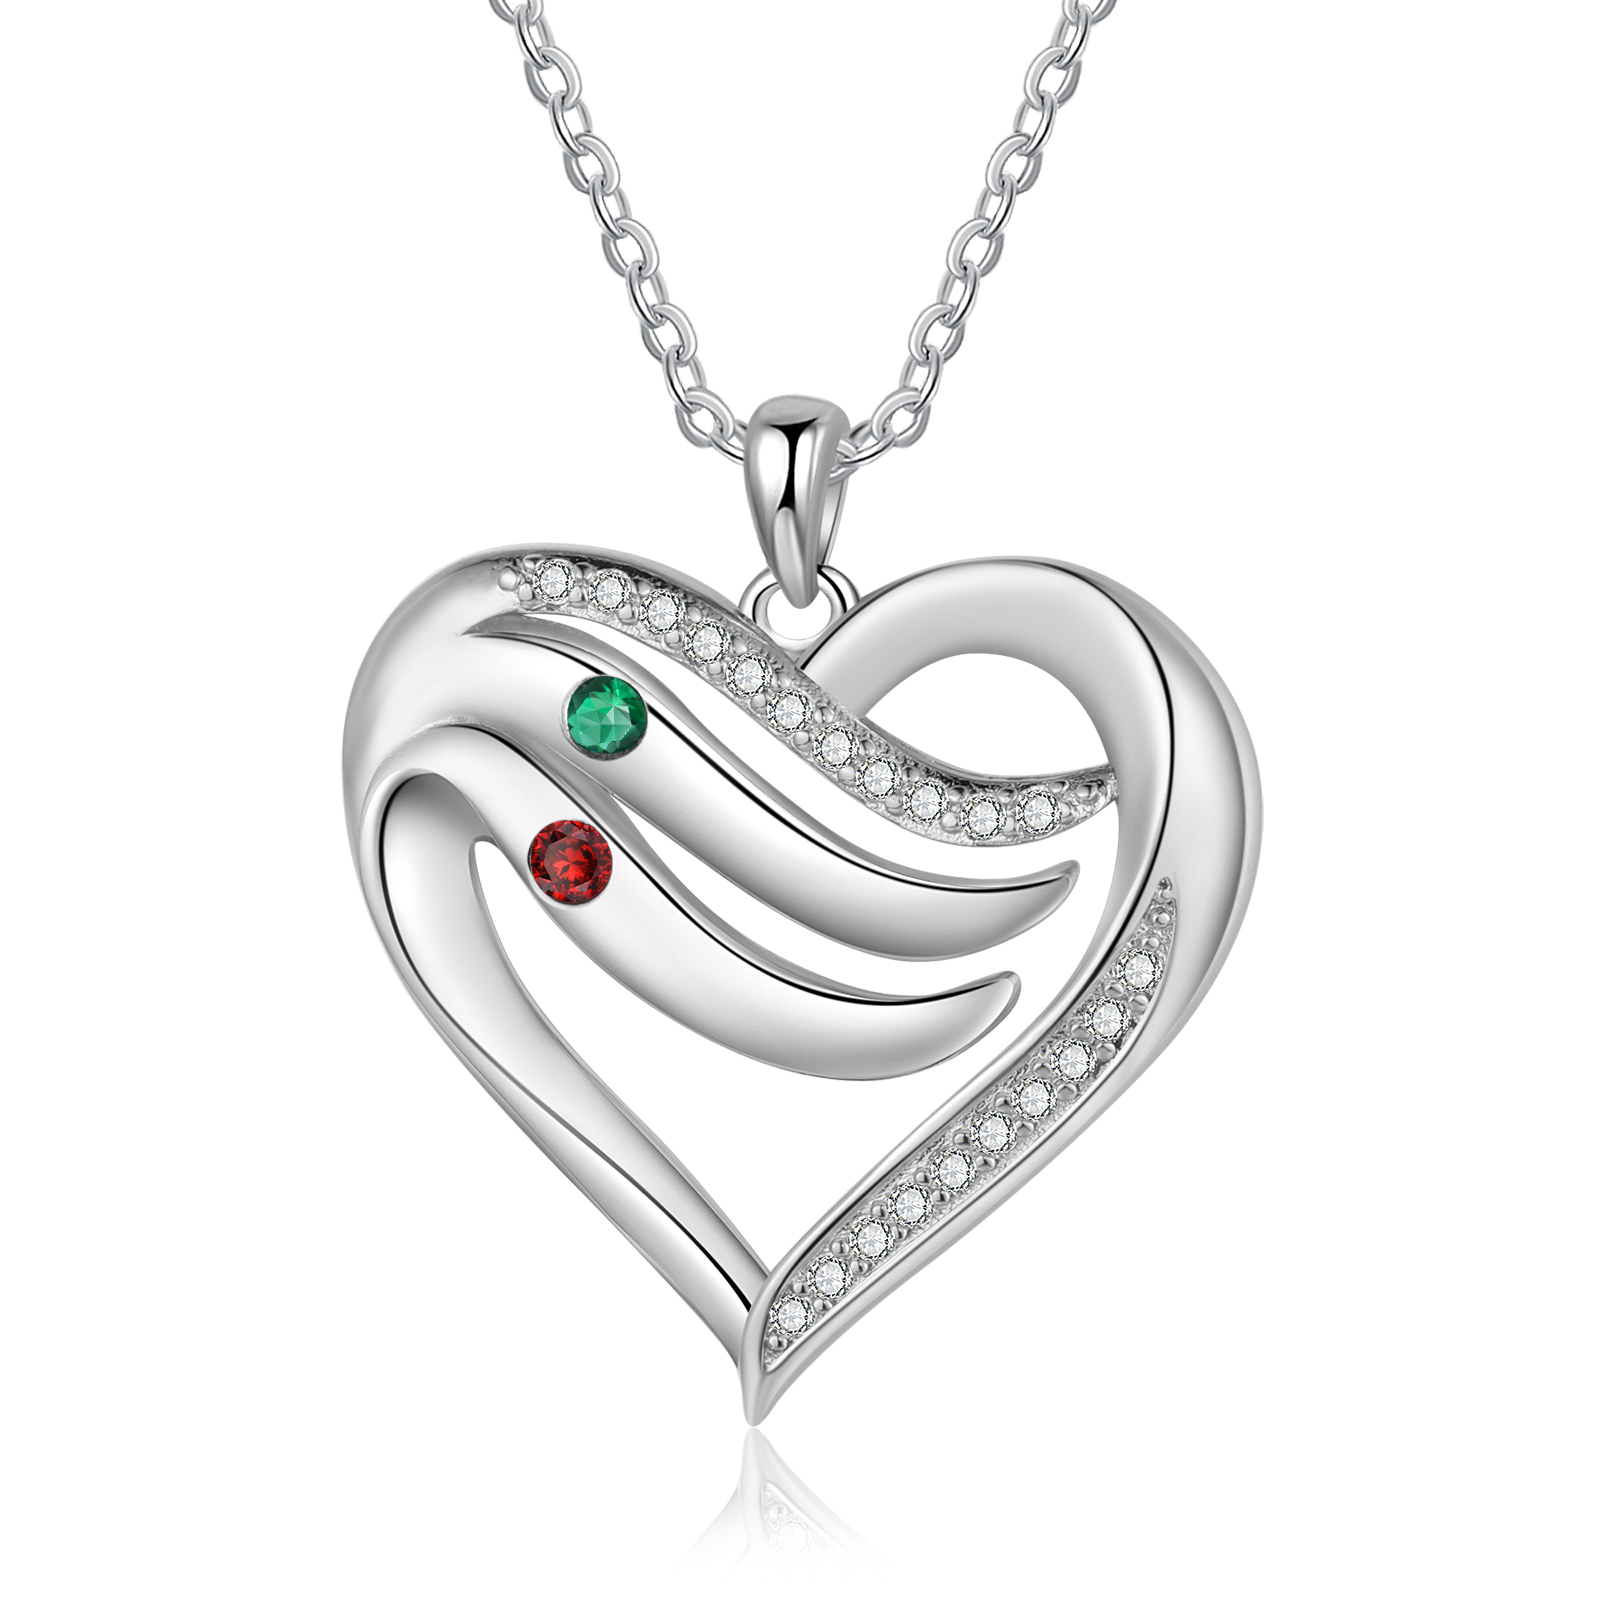 2 Names - Personalized S925 Silver Heart Necklace with Birthstone and Name, Beautiful Gift for Her